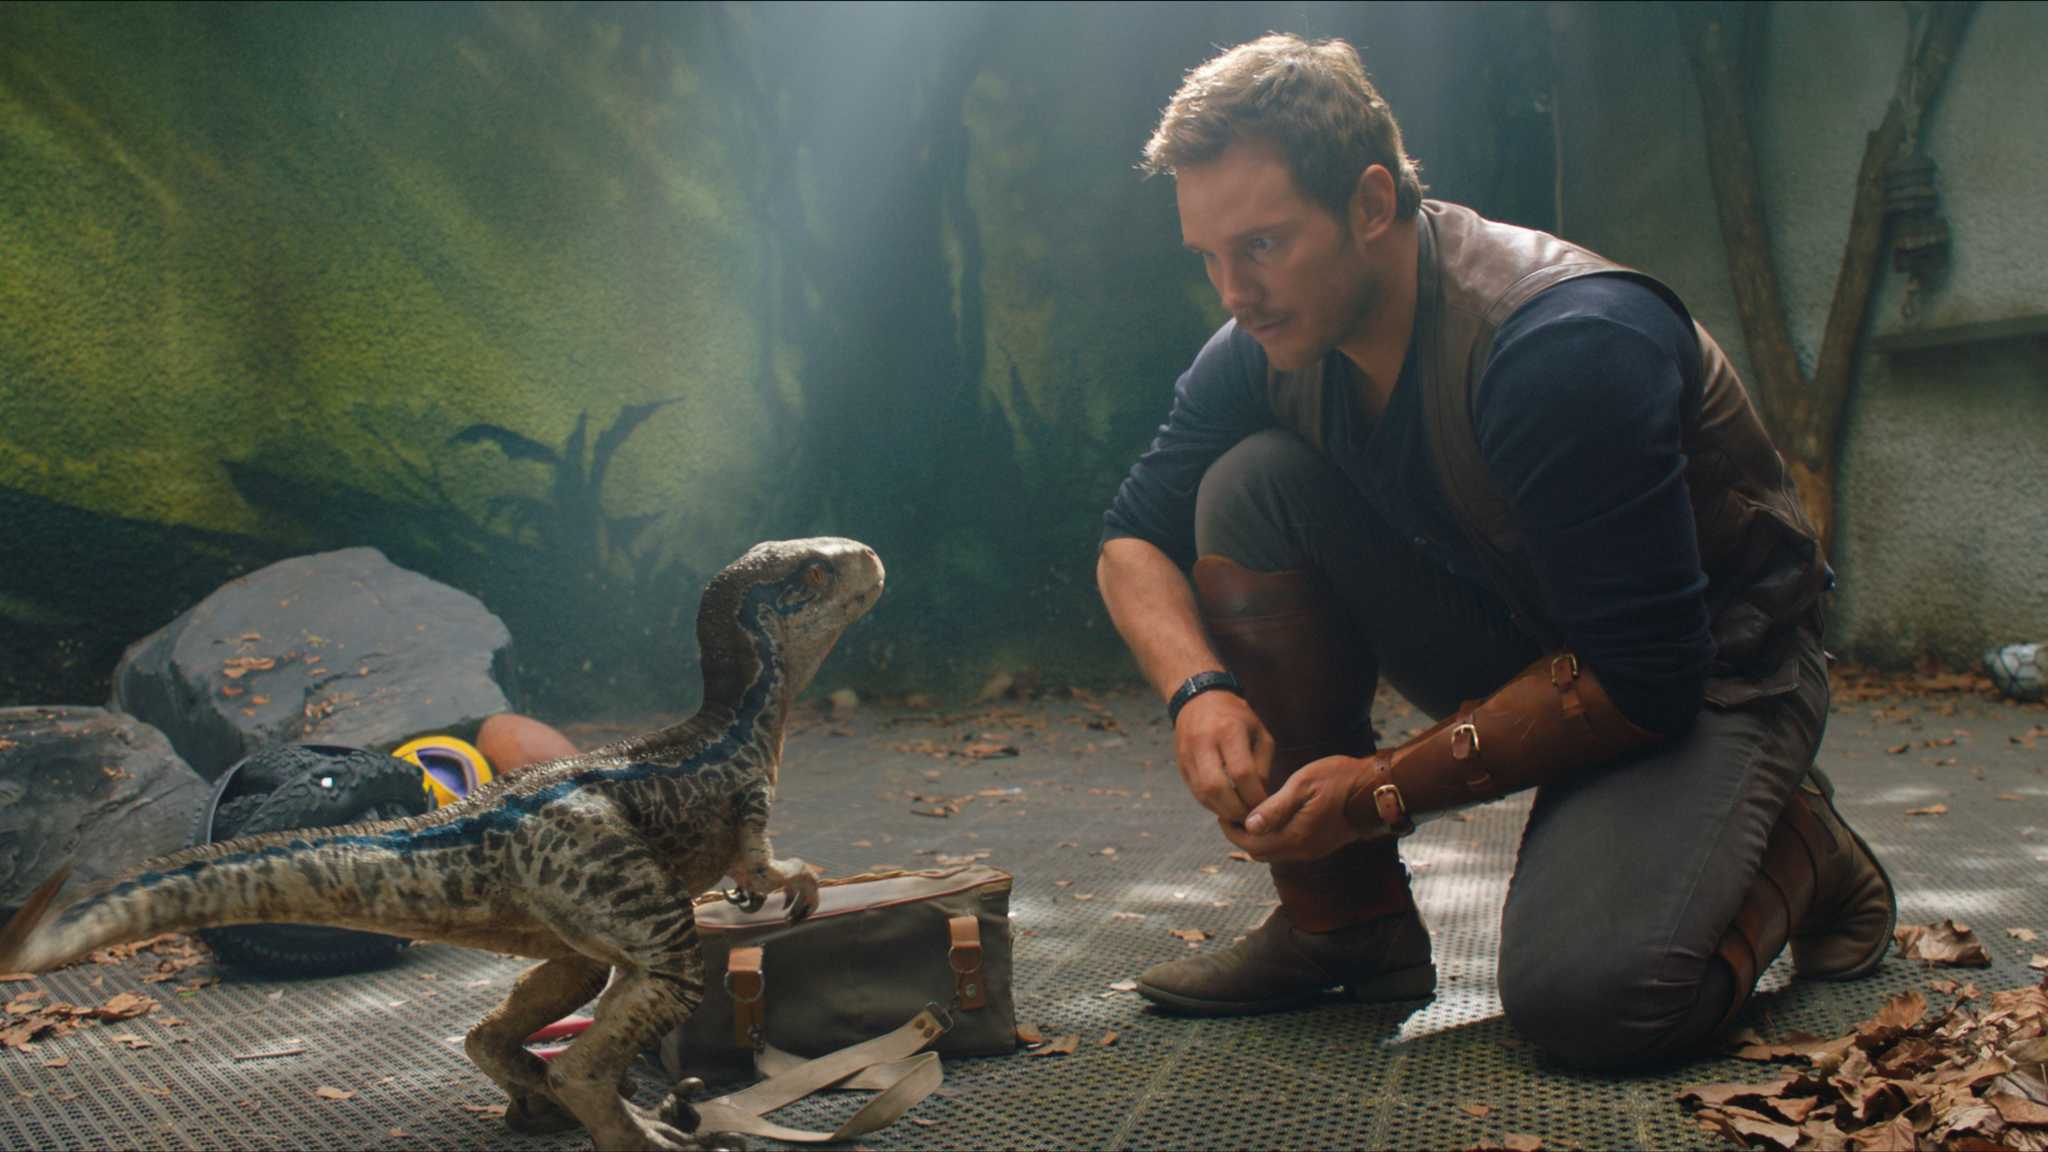  A man crouches while talking to a baby dinosaur in this photo from Amblin Entertainment.